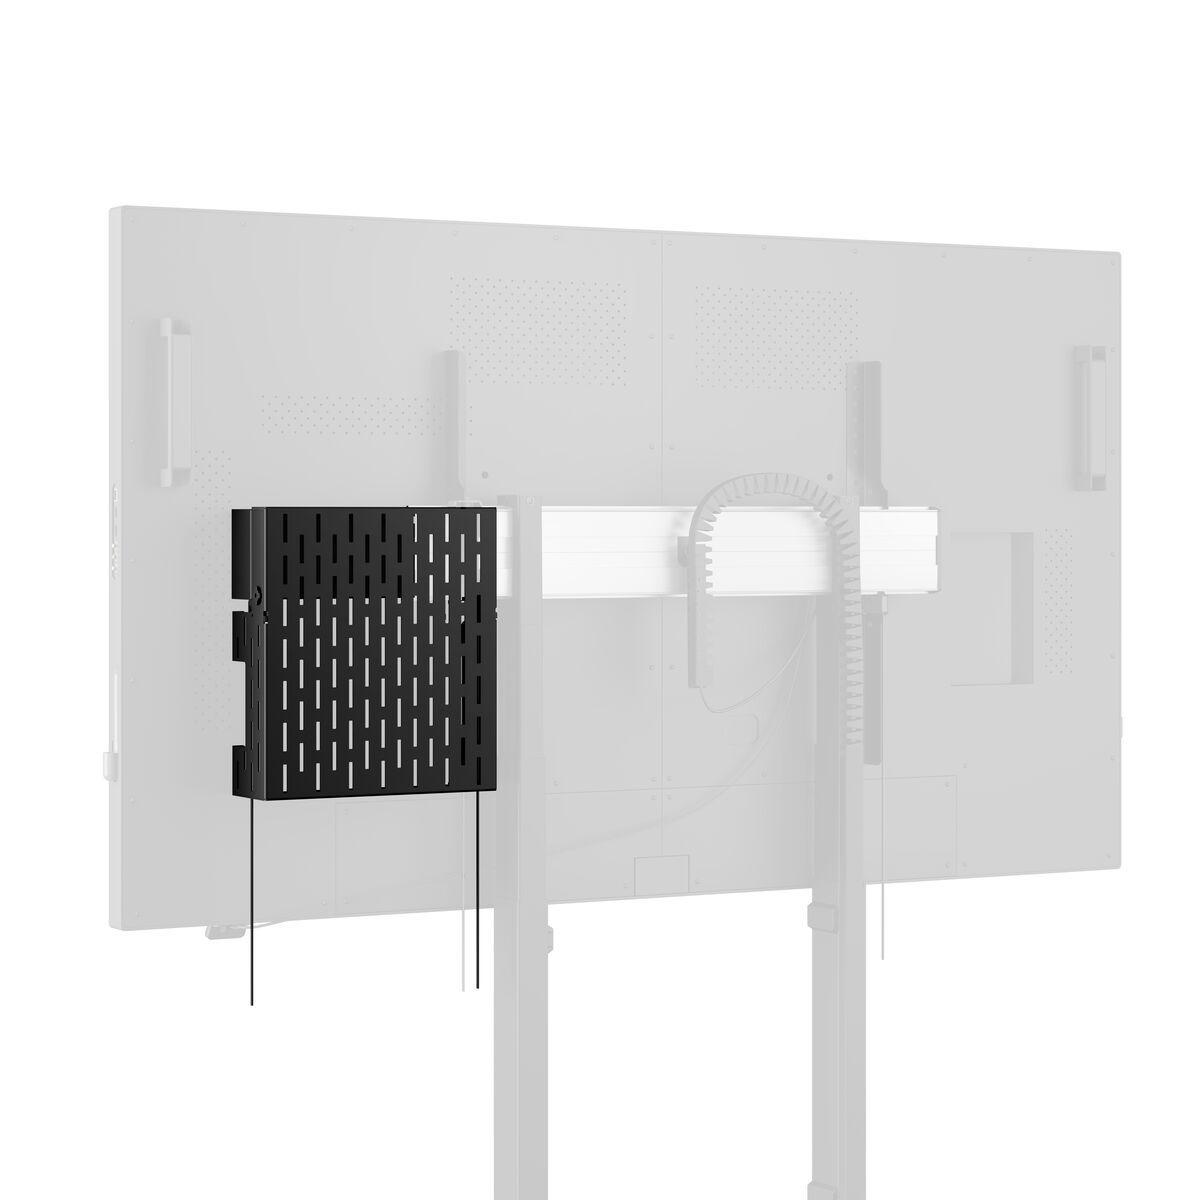 Vogels RISE A311 - Hidden storage unit for a RISE motorized display lift